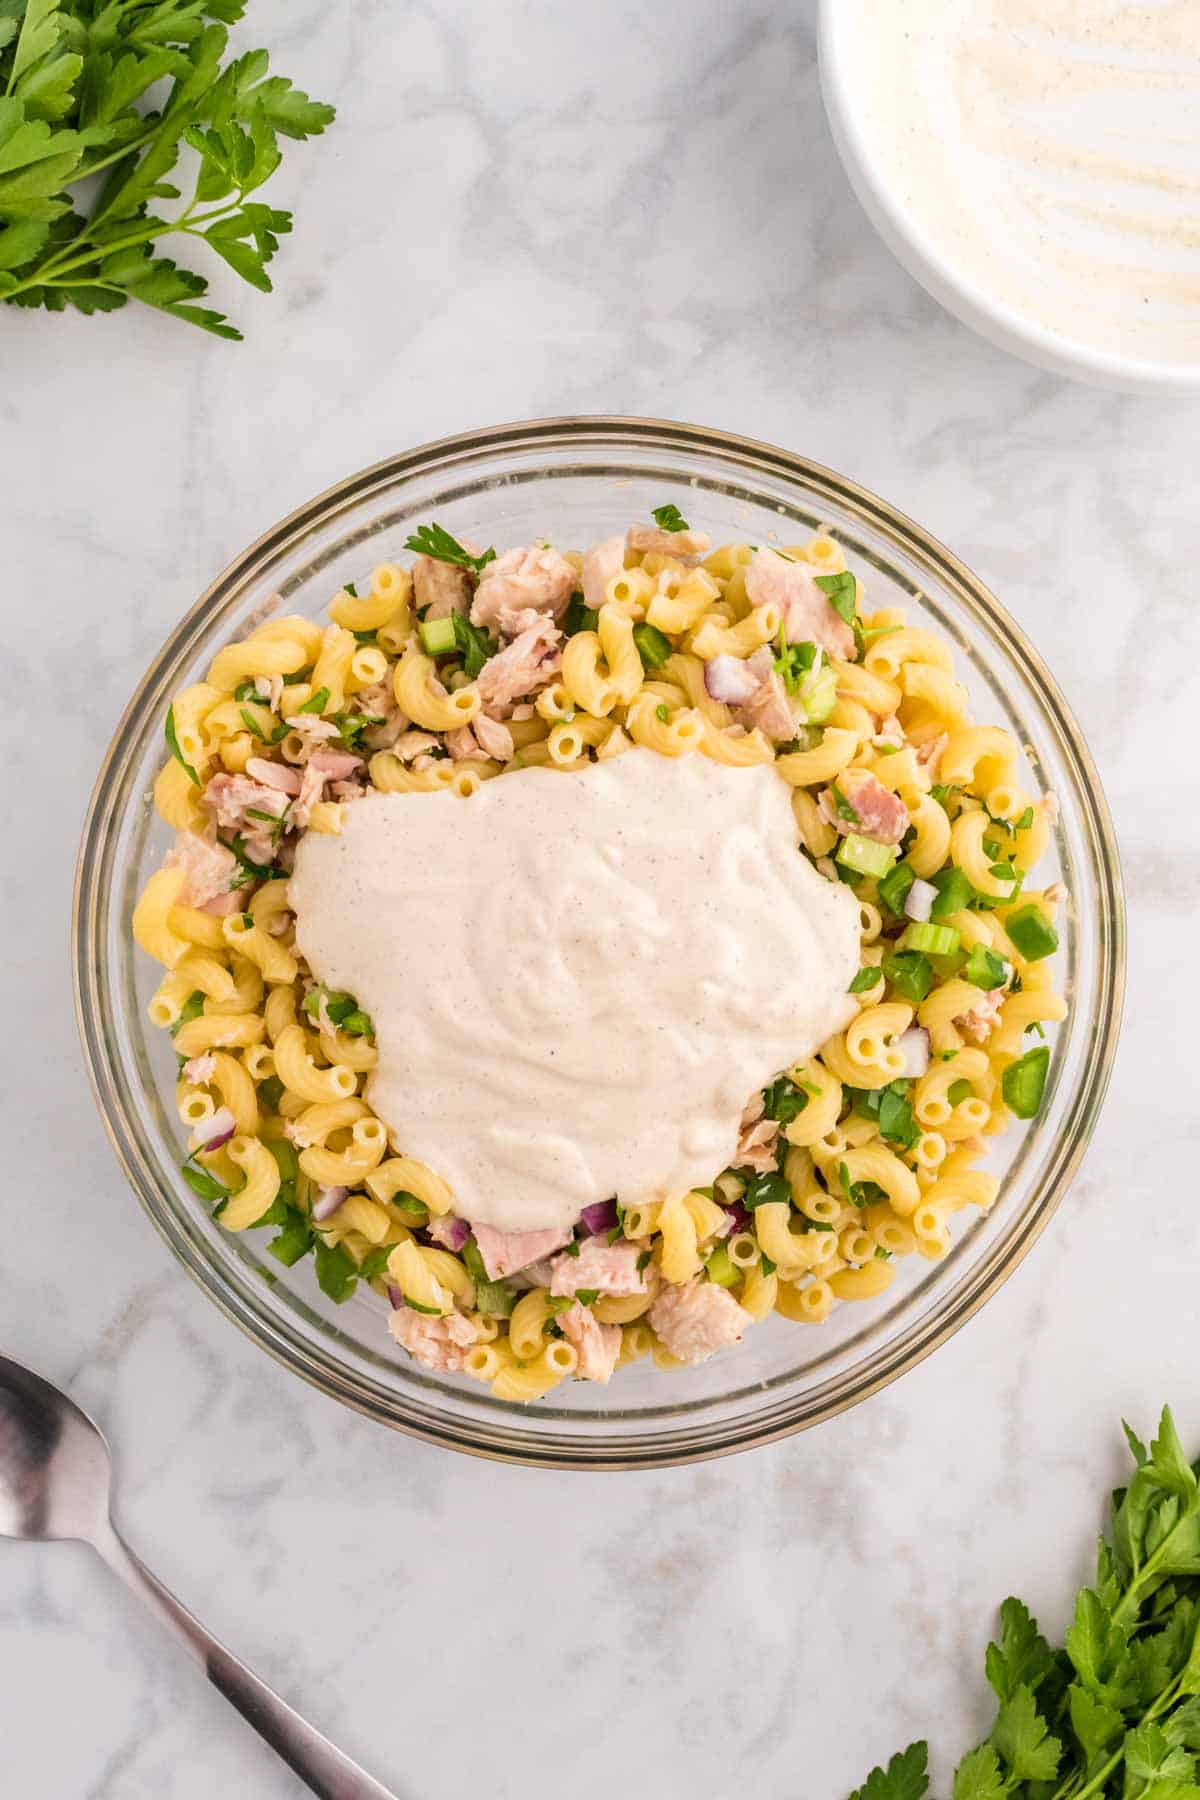 mayo dressing on top of tuna pasta salad ingredients in a mixing bowl